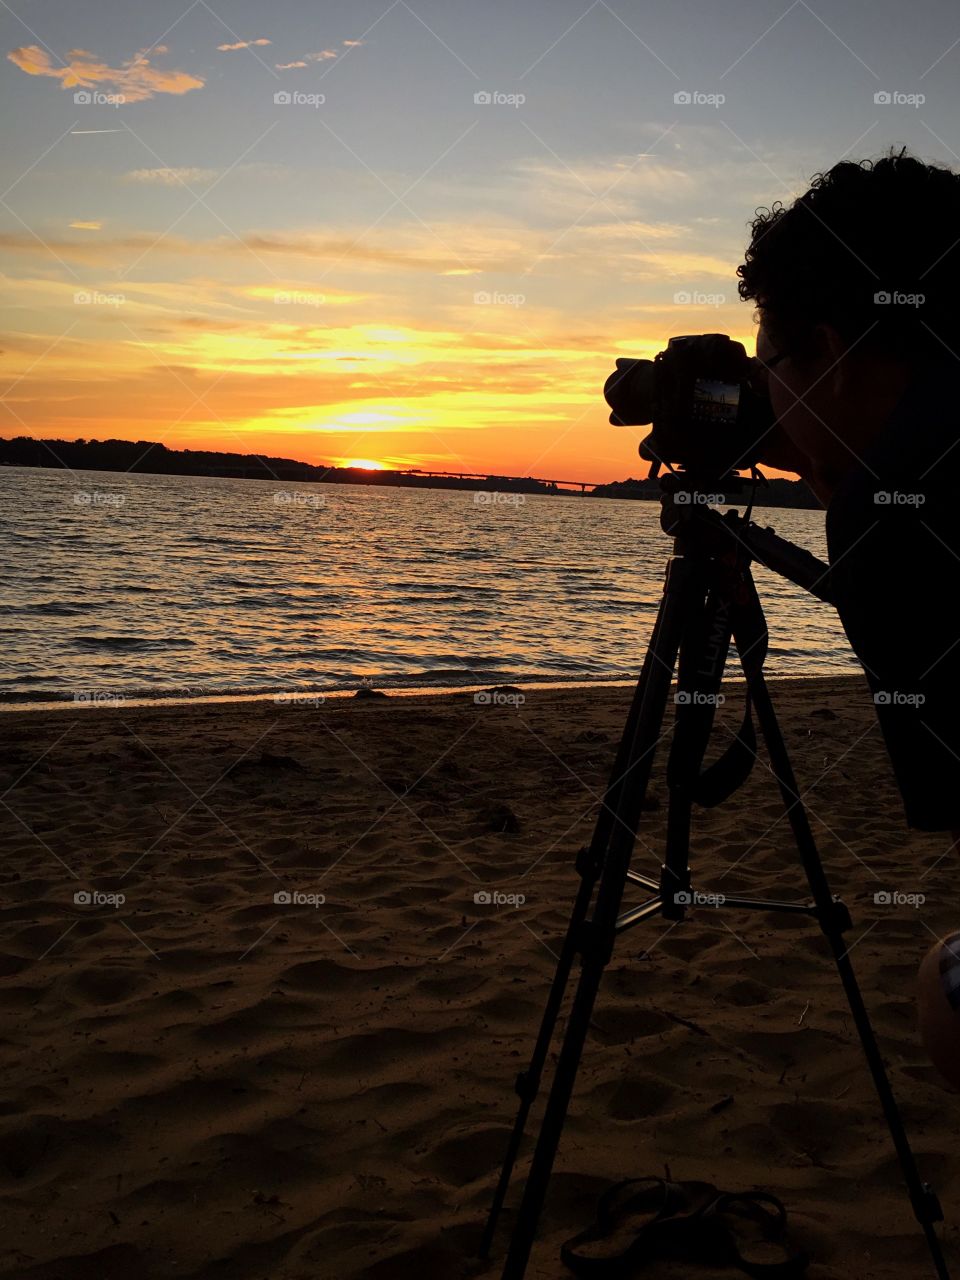 Shooting the sunset . The sunset was amazing 